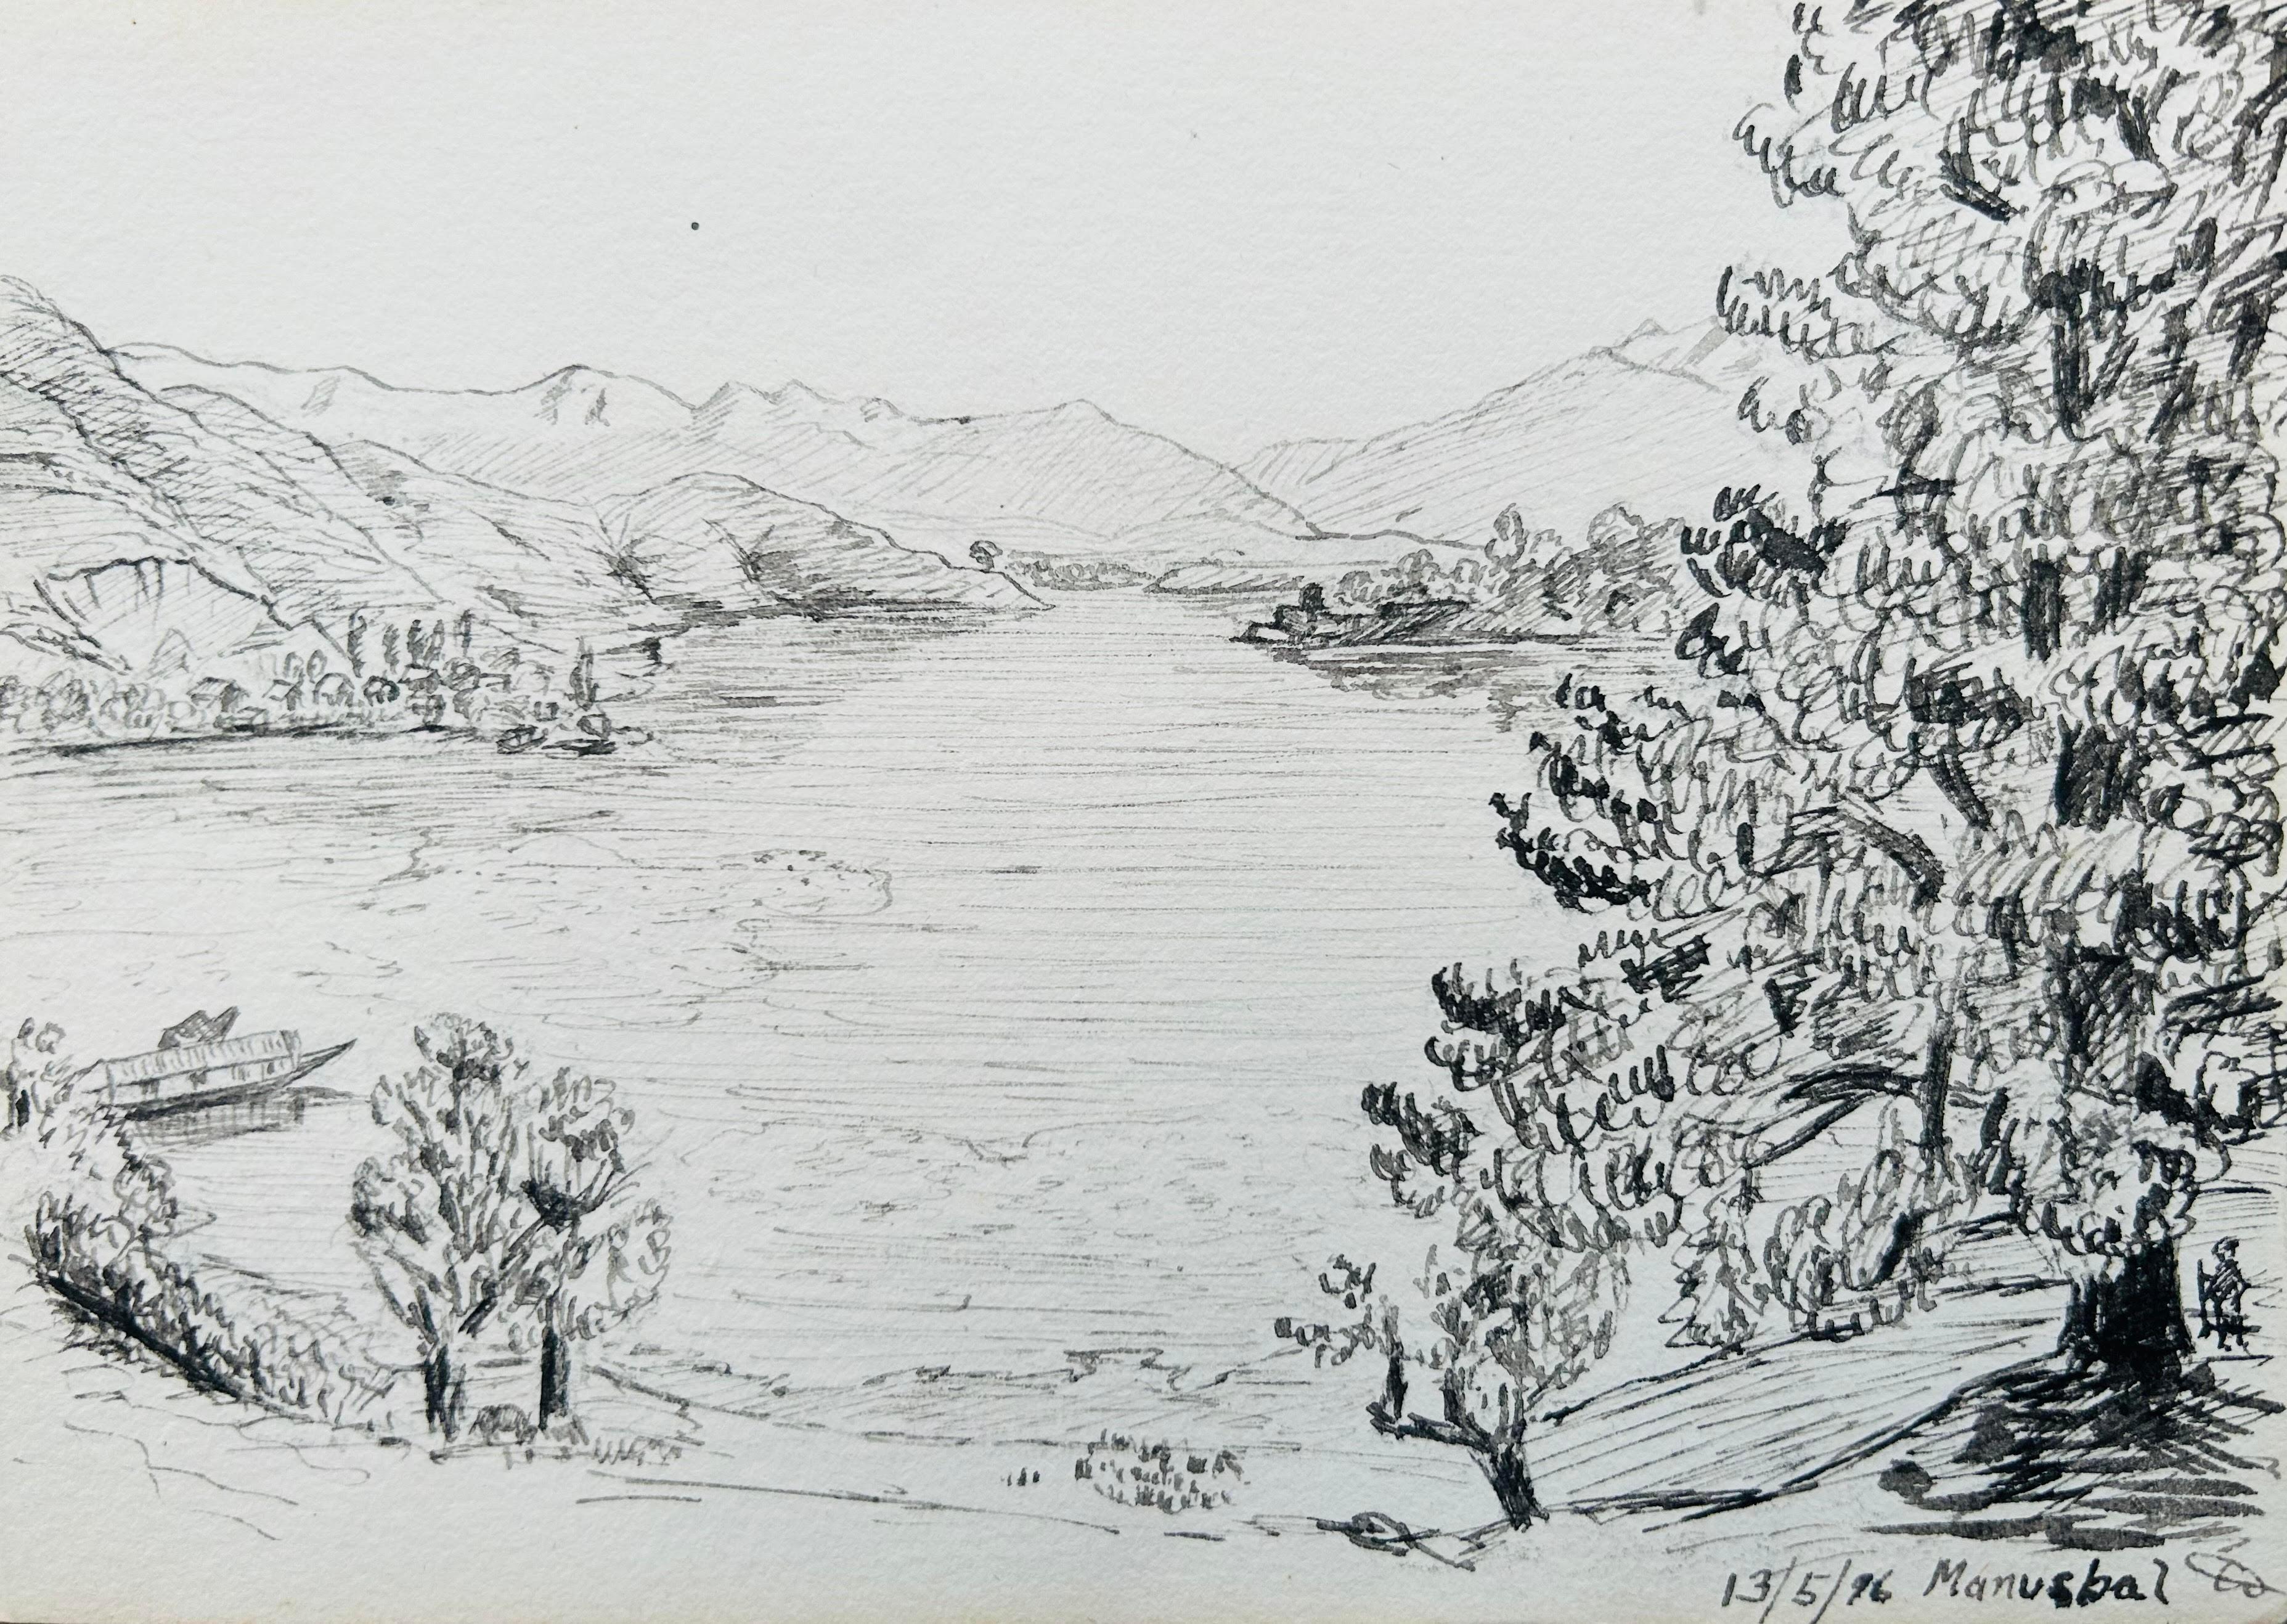 India 3 X 19th century Kashmir NW Frontier Field Sketches Manasbal Lake, Kashmir For Sale 1